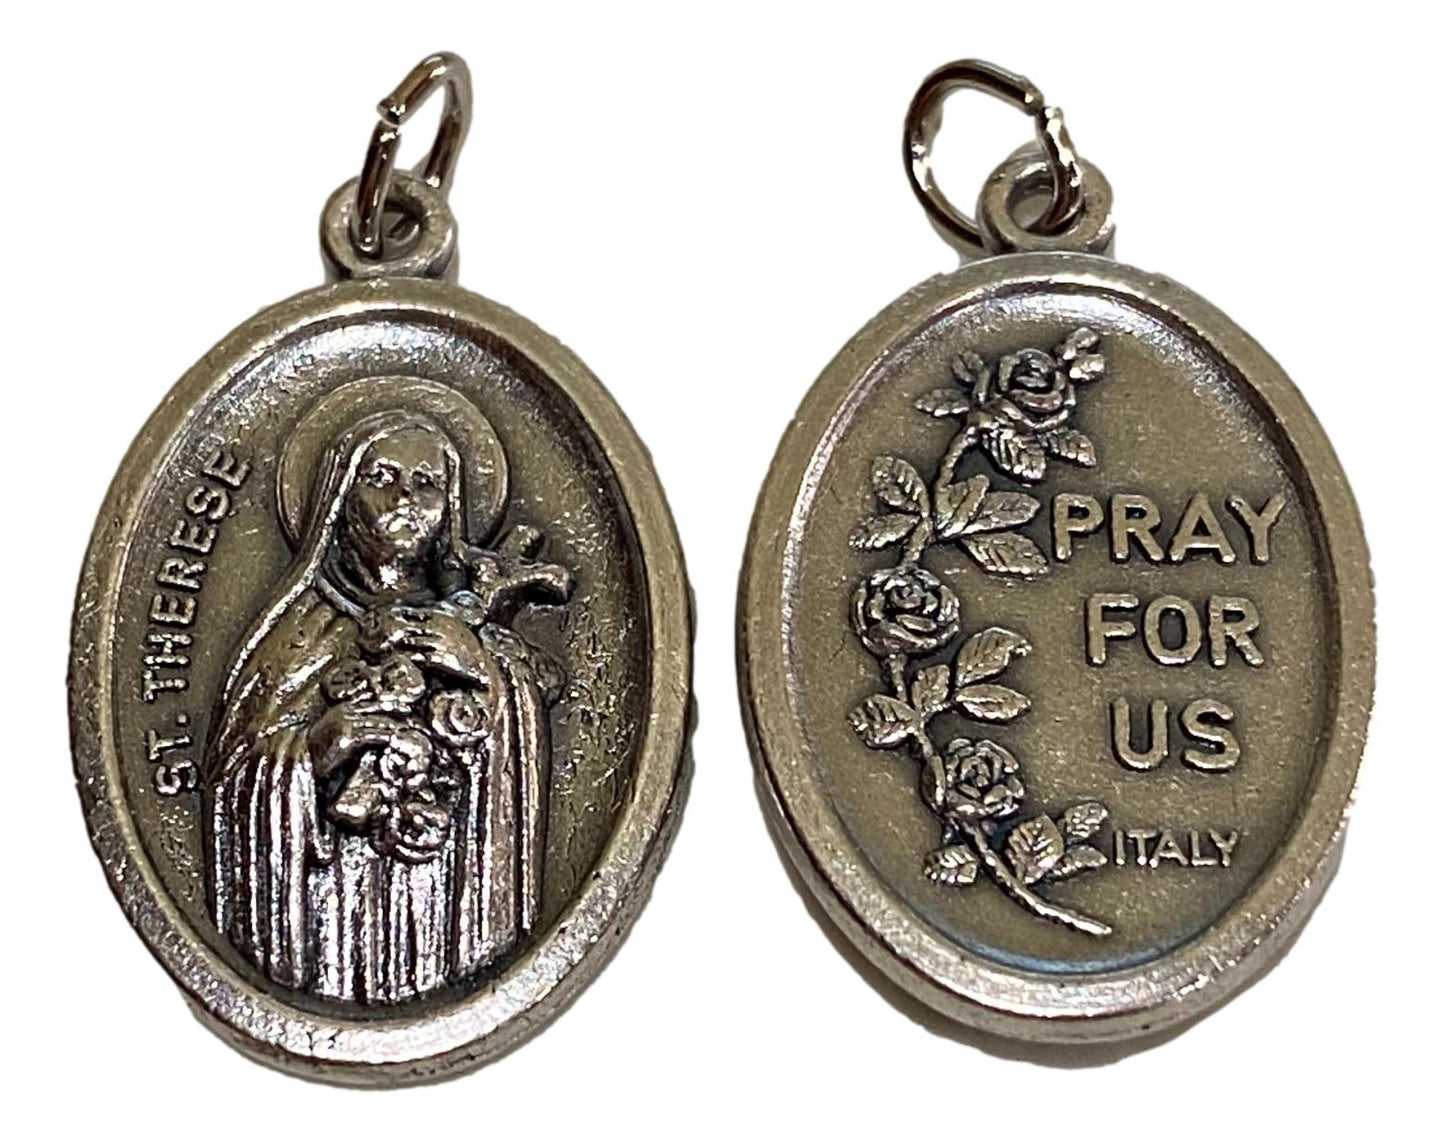 Medal Saint Therese Pray For Us Italian Double-Sided Silver Oxidized Metal Alloy 1 inch - Ysleta Mission Gift Shop- VOTED El Paso's Best Gift Shop